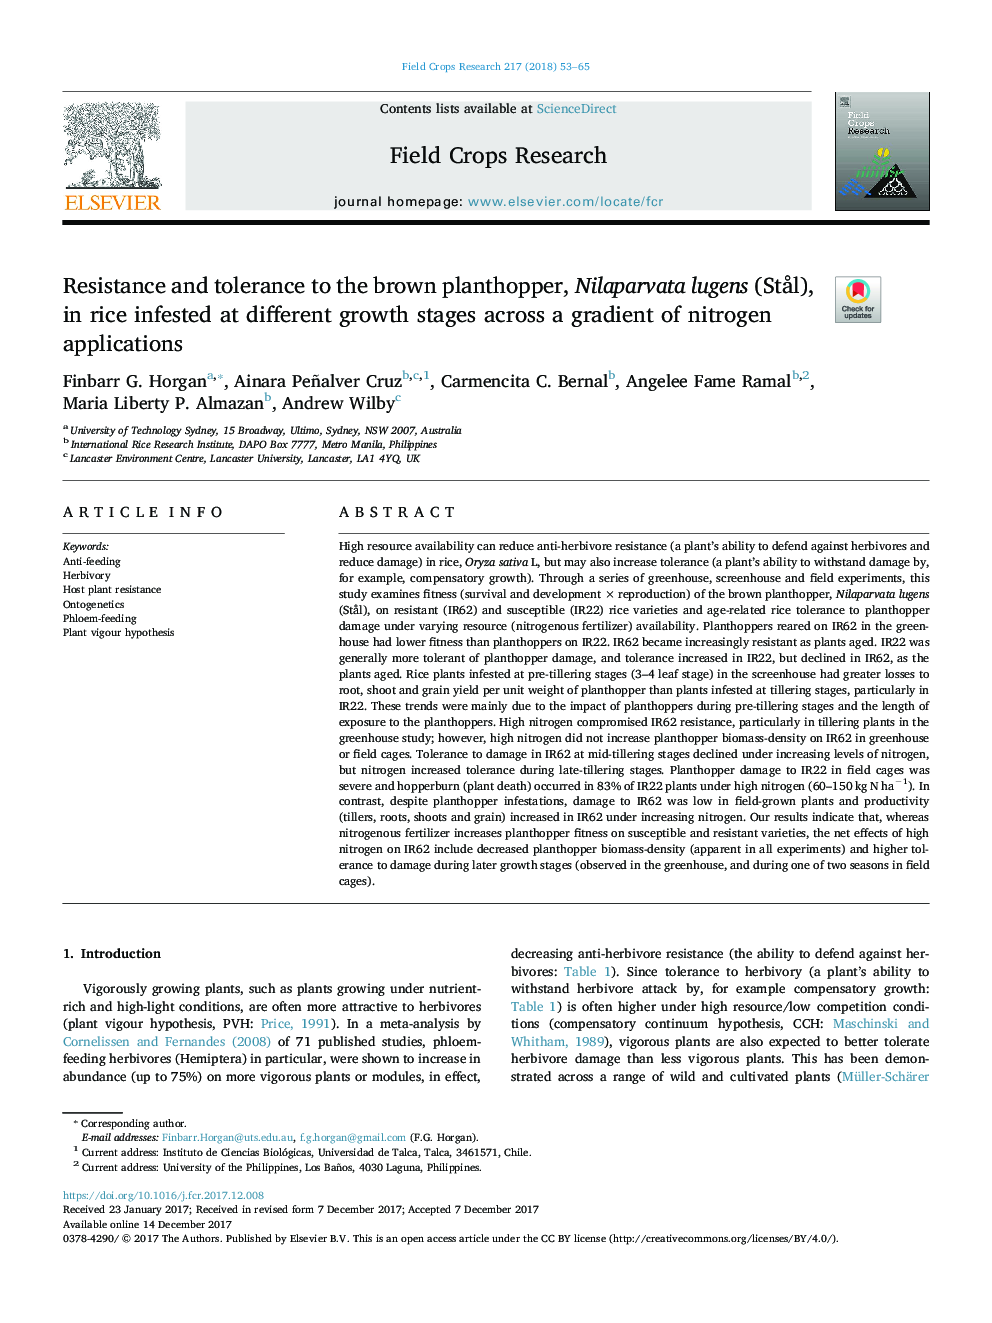 Resistance and tolerance to the brown planthopper, Nilaparvata lugens (StÃ¥l), in rice infested at different growth stages across a gradient of nitrogen applications